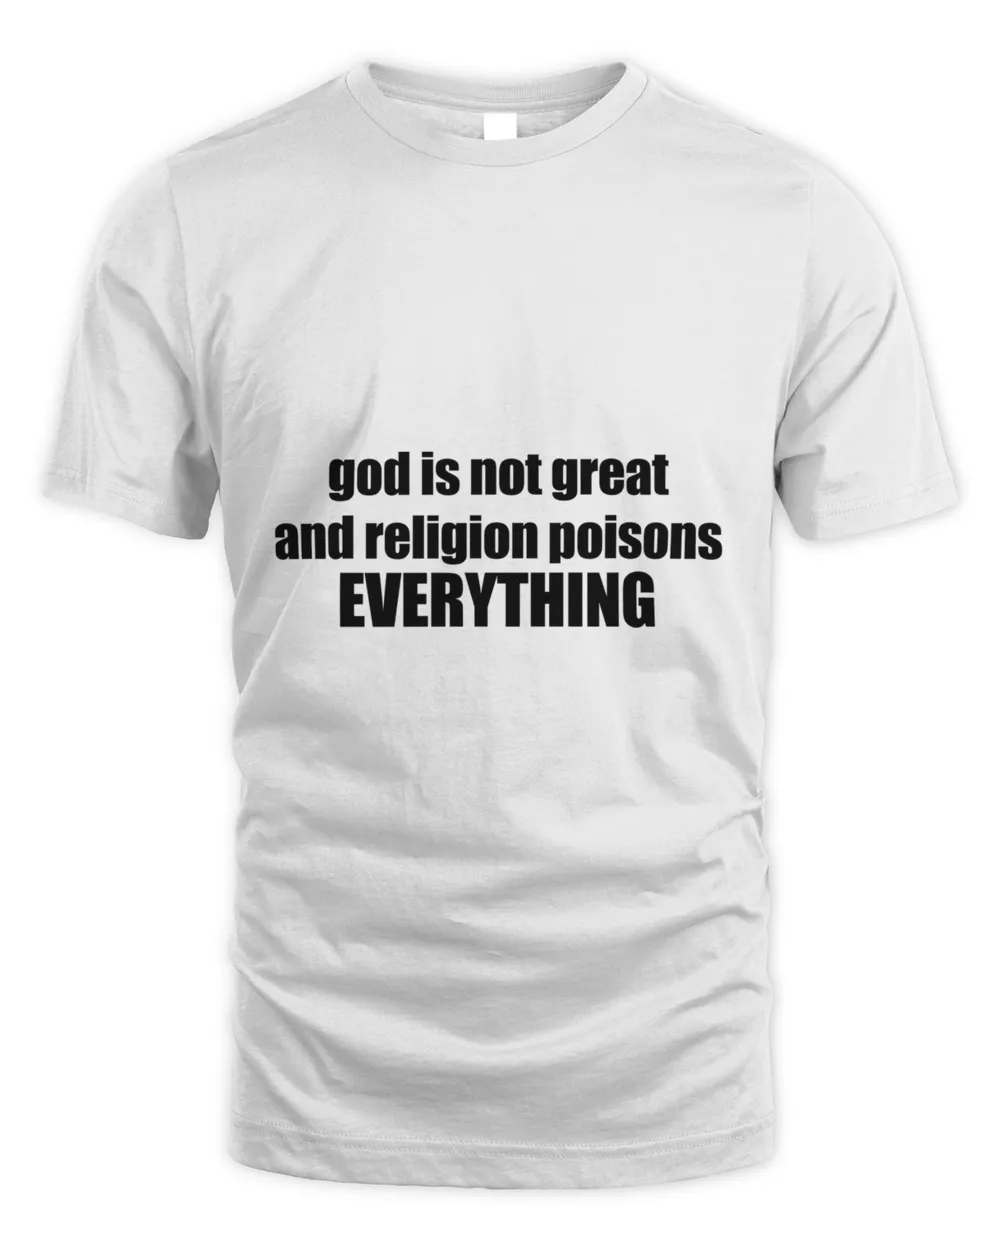 god is not great and religion poisons EVERYTHING5492 T-Shirt